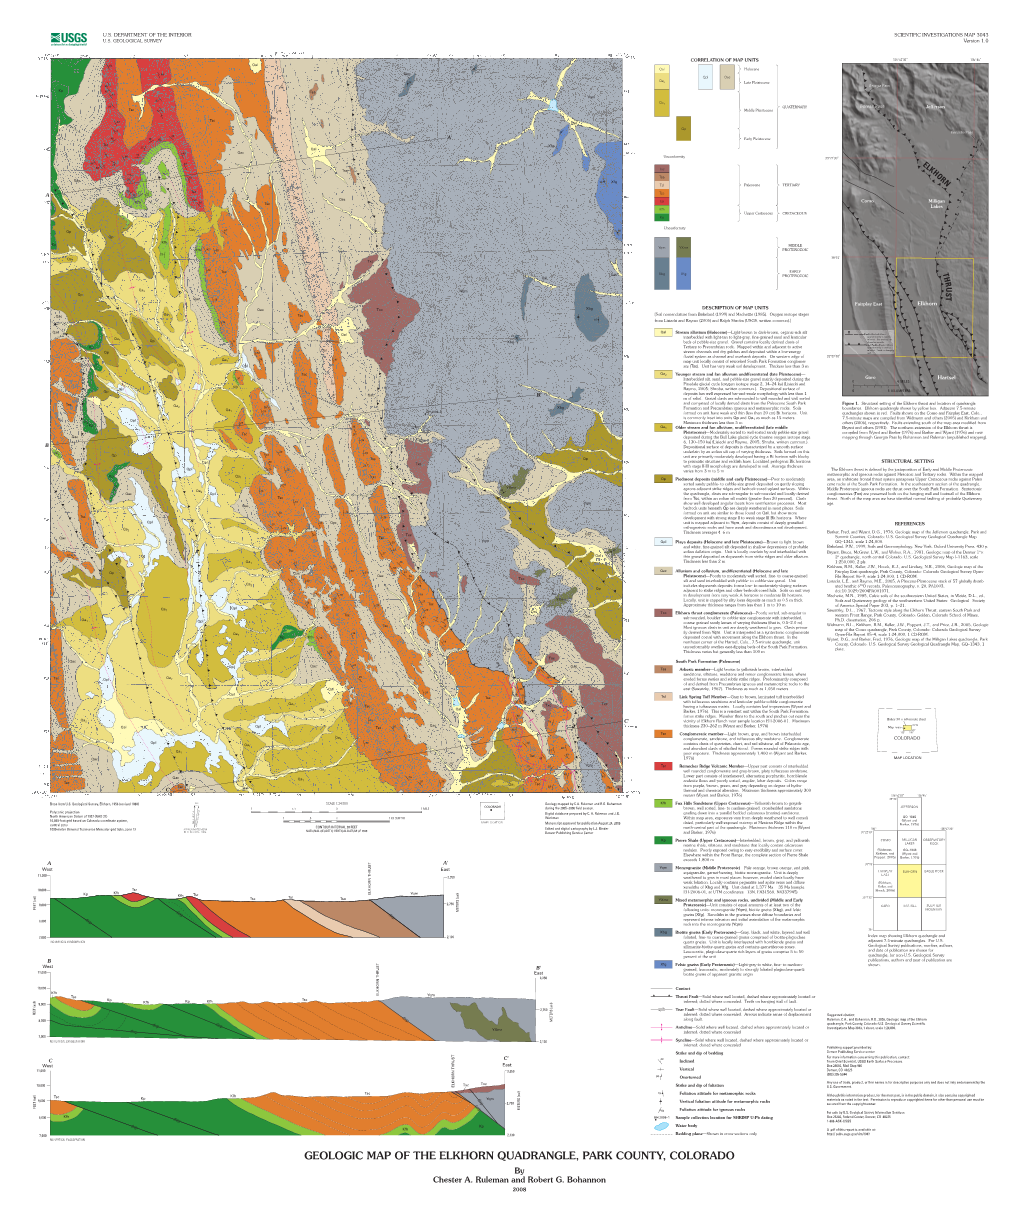 GEOLOGIC MAP of the ELKHORN QUADRANGLE, PARK COUNTY, COLORADO by Chester A